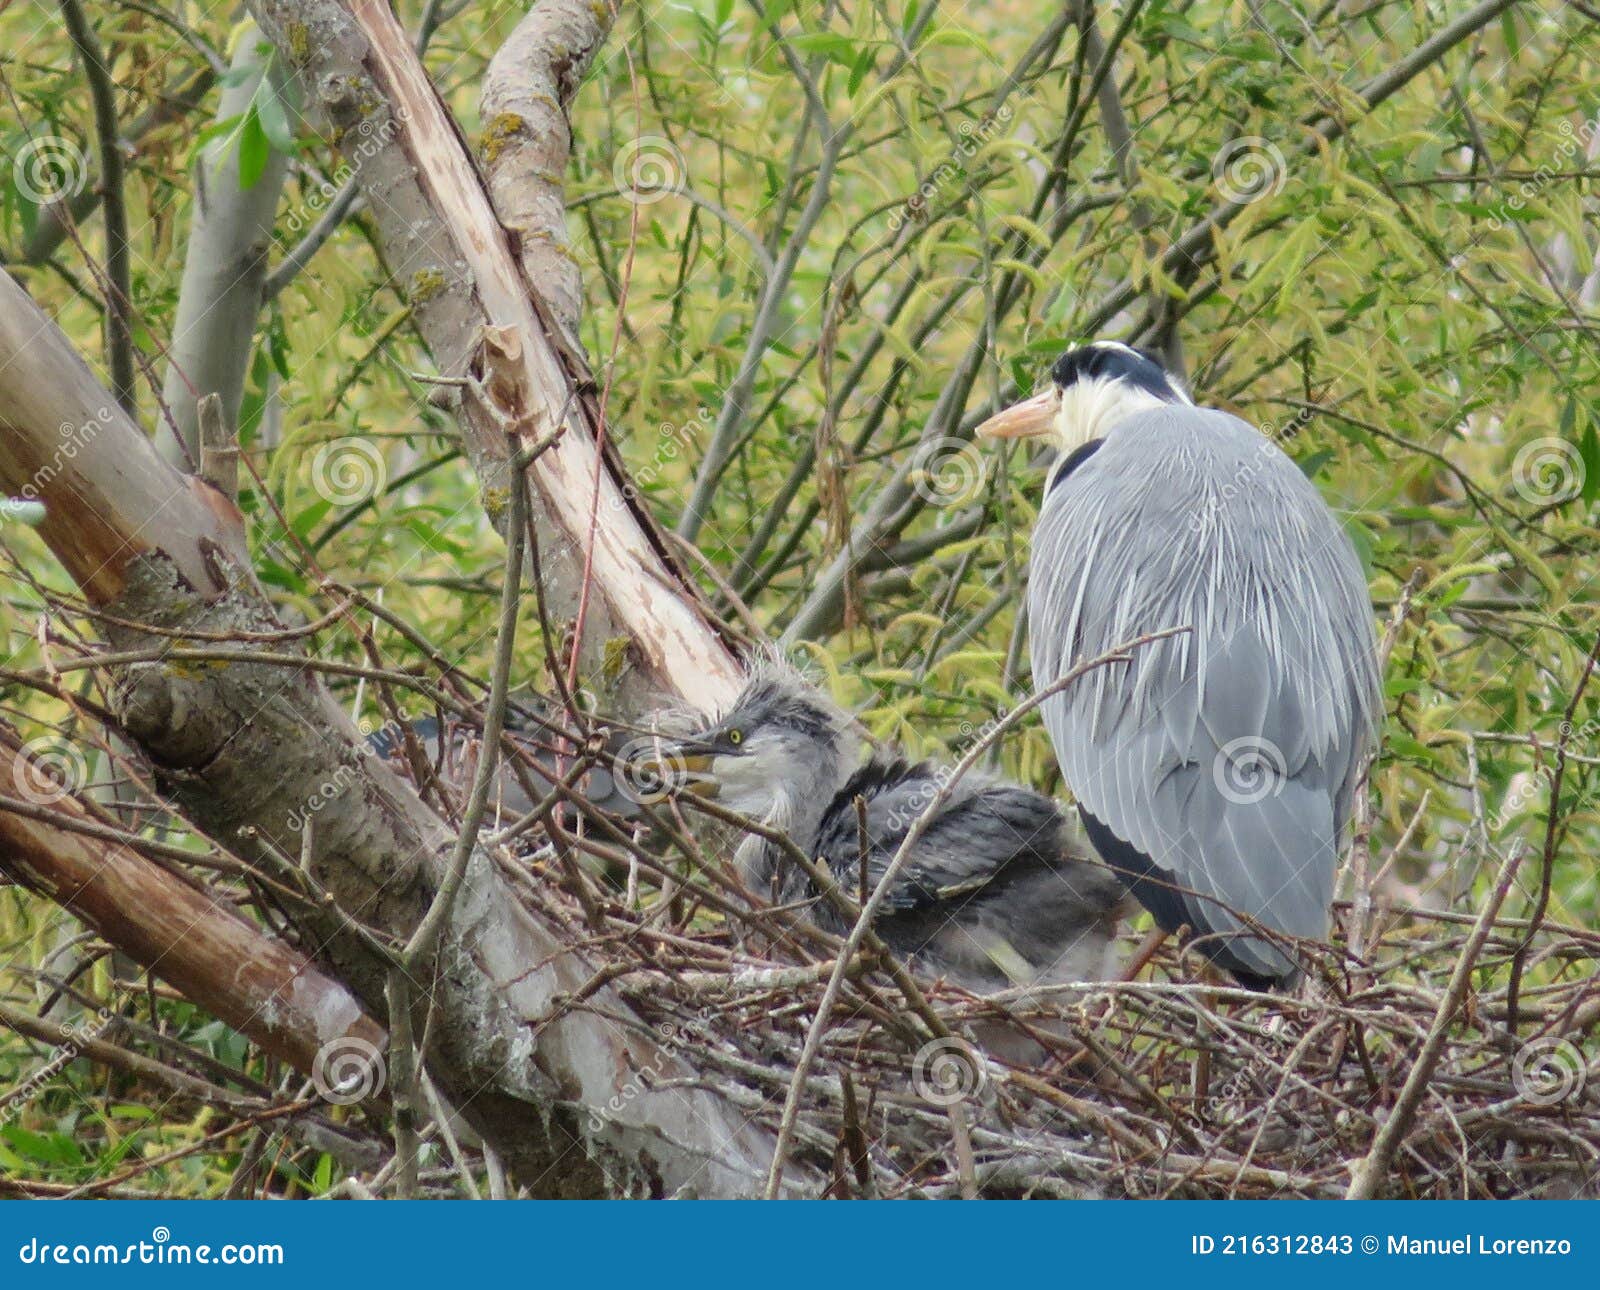 royal heron nest with chick caring for and feeding family